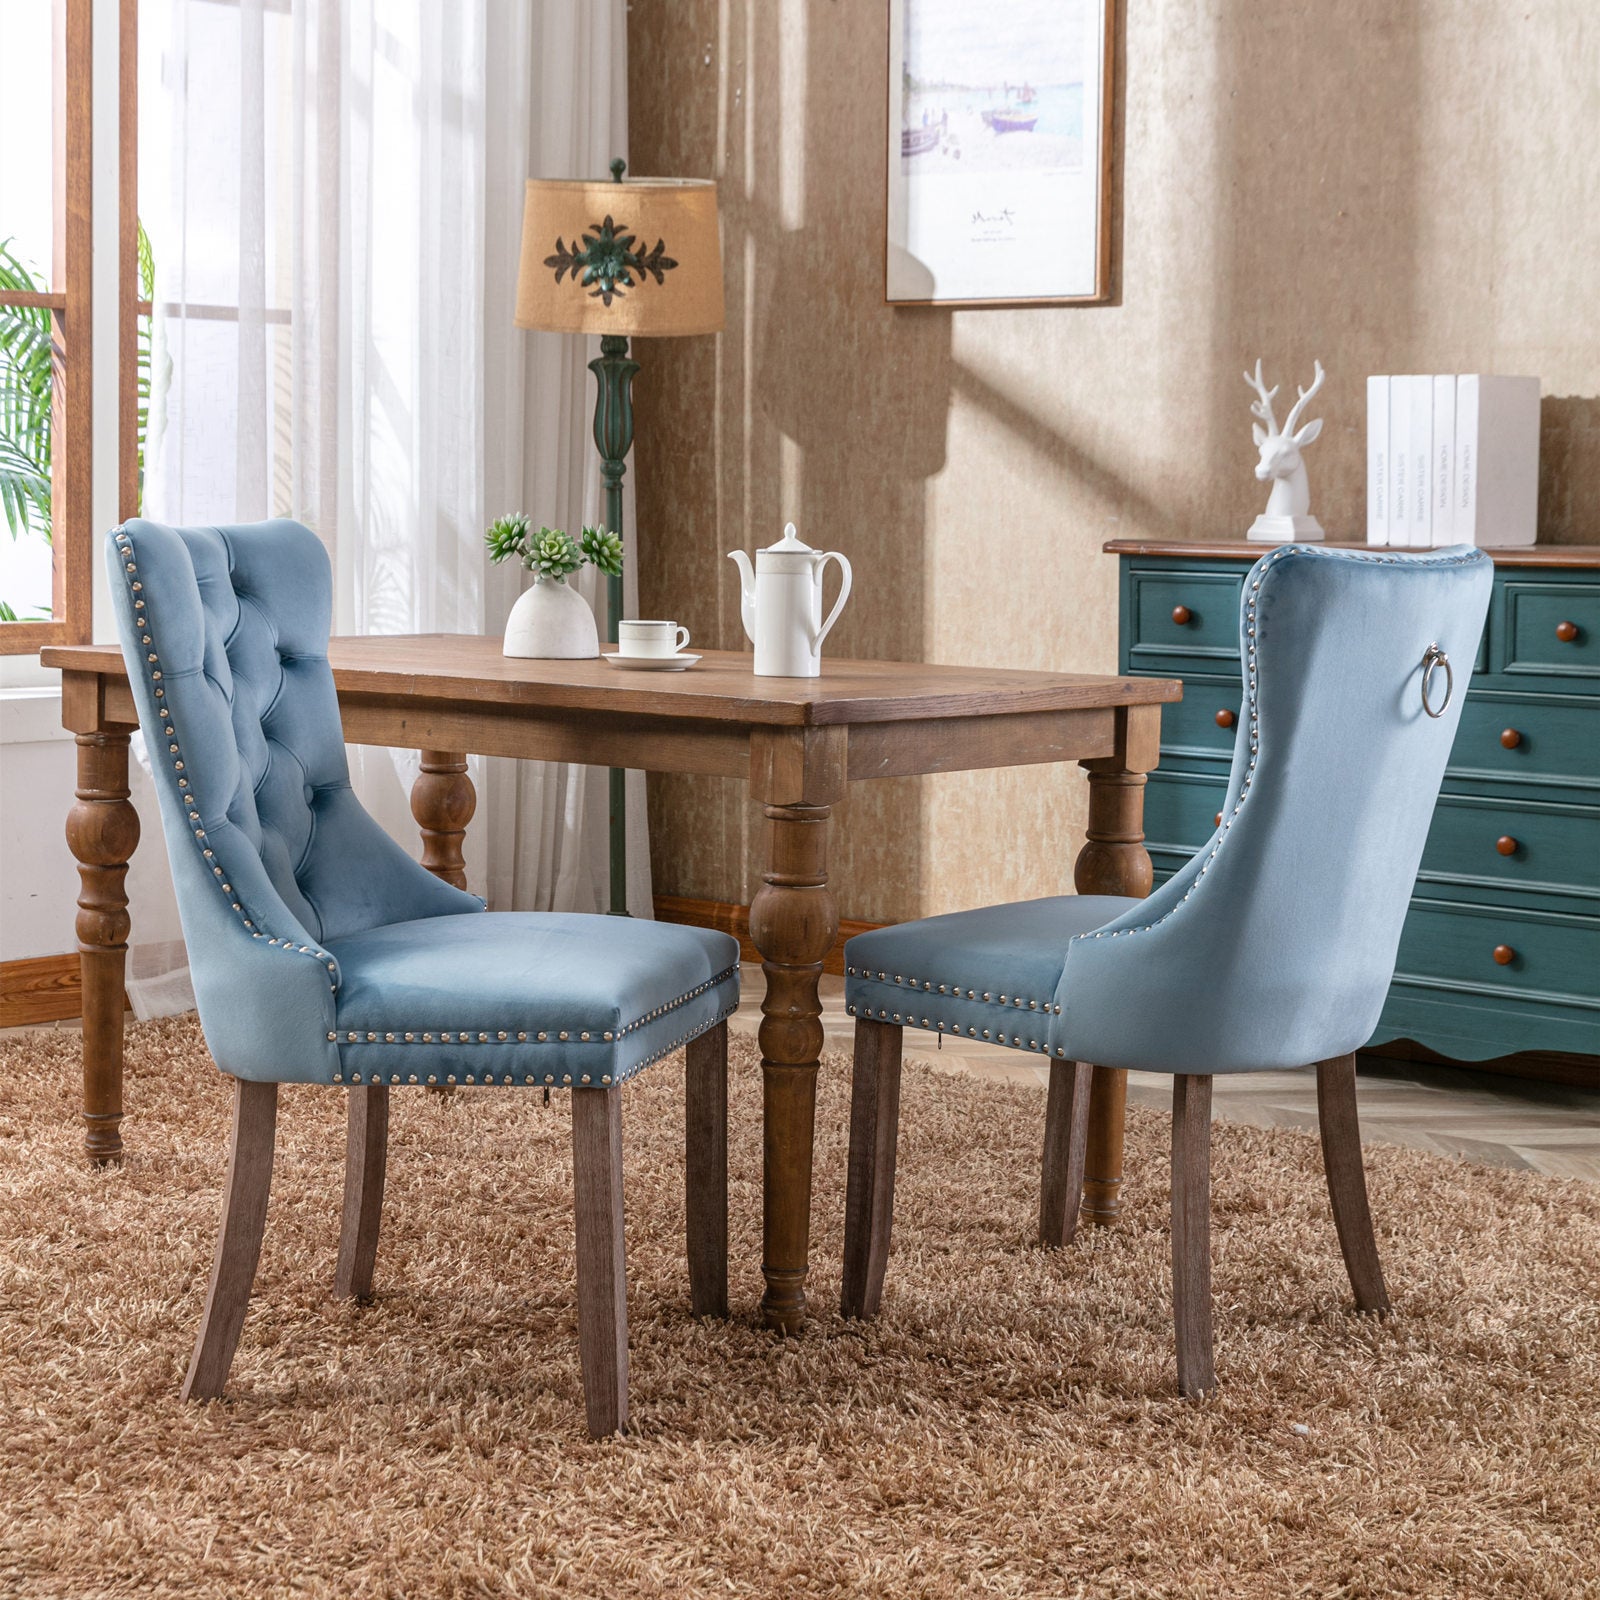 High-end Tufted Solid Wood Contemporary Velvet Upholstered Dining Chair with Wood Legs Nailhead Trim 2-Pcs Set, Light Blue